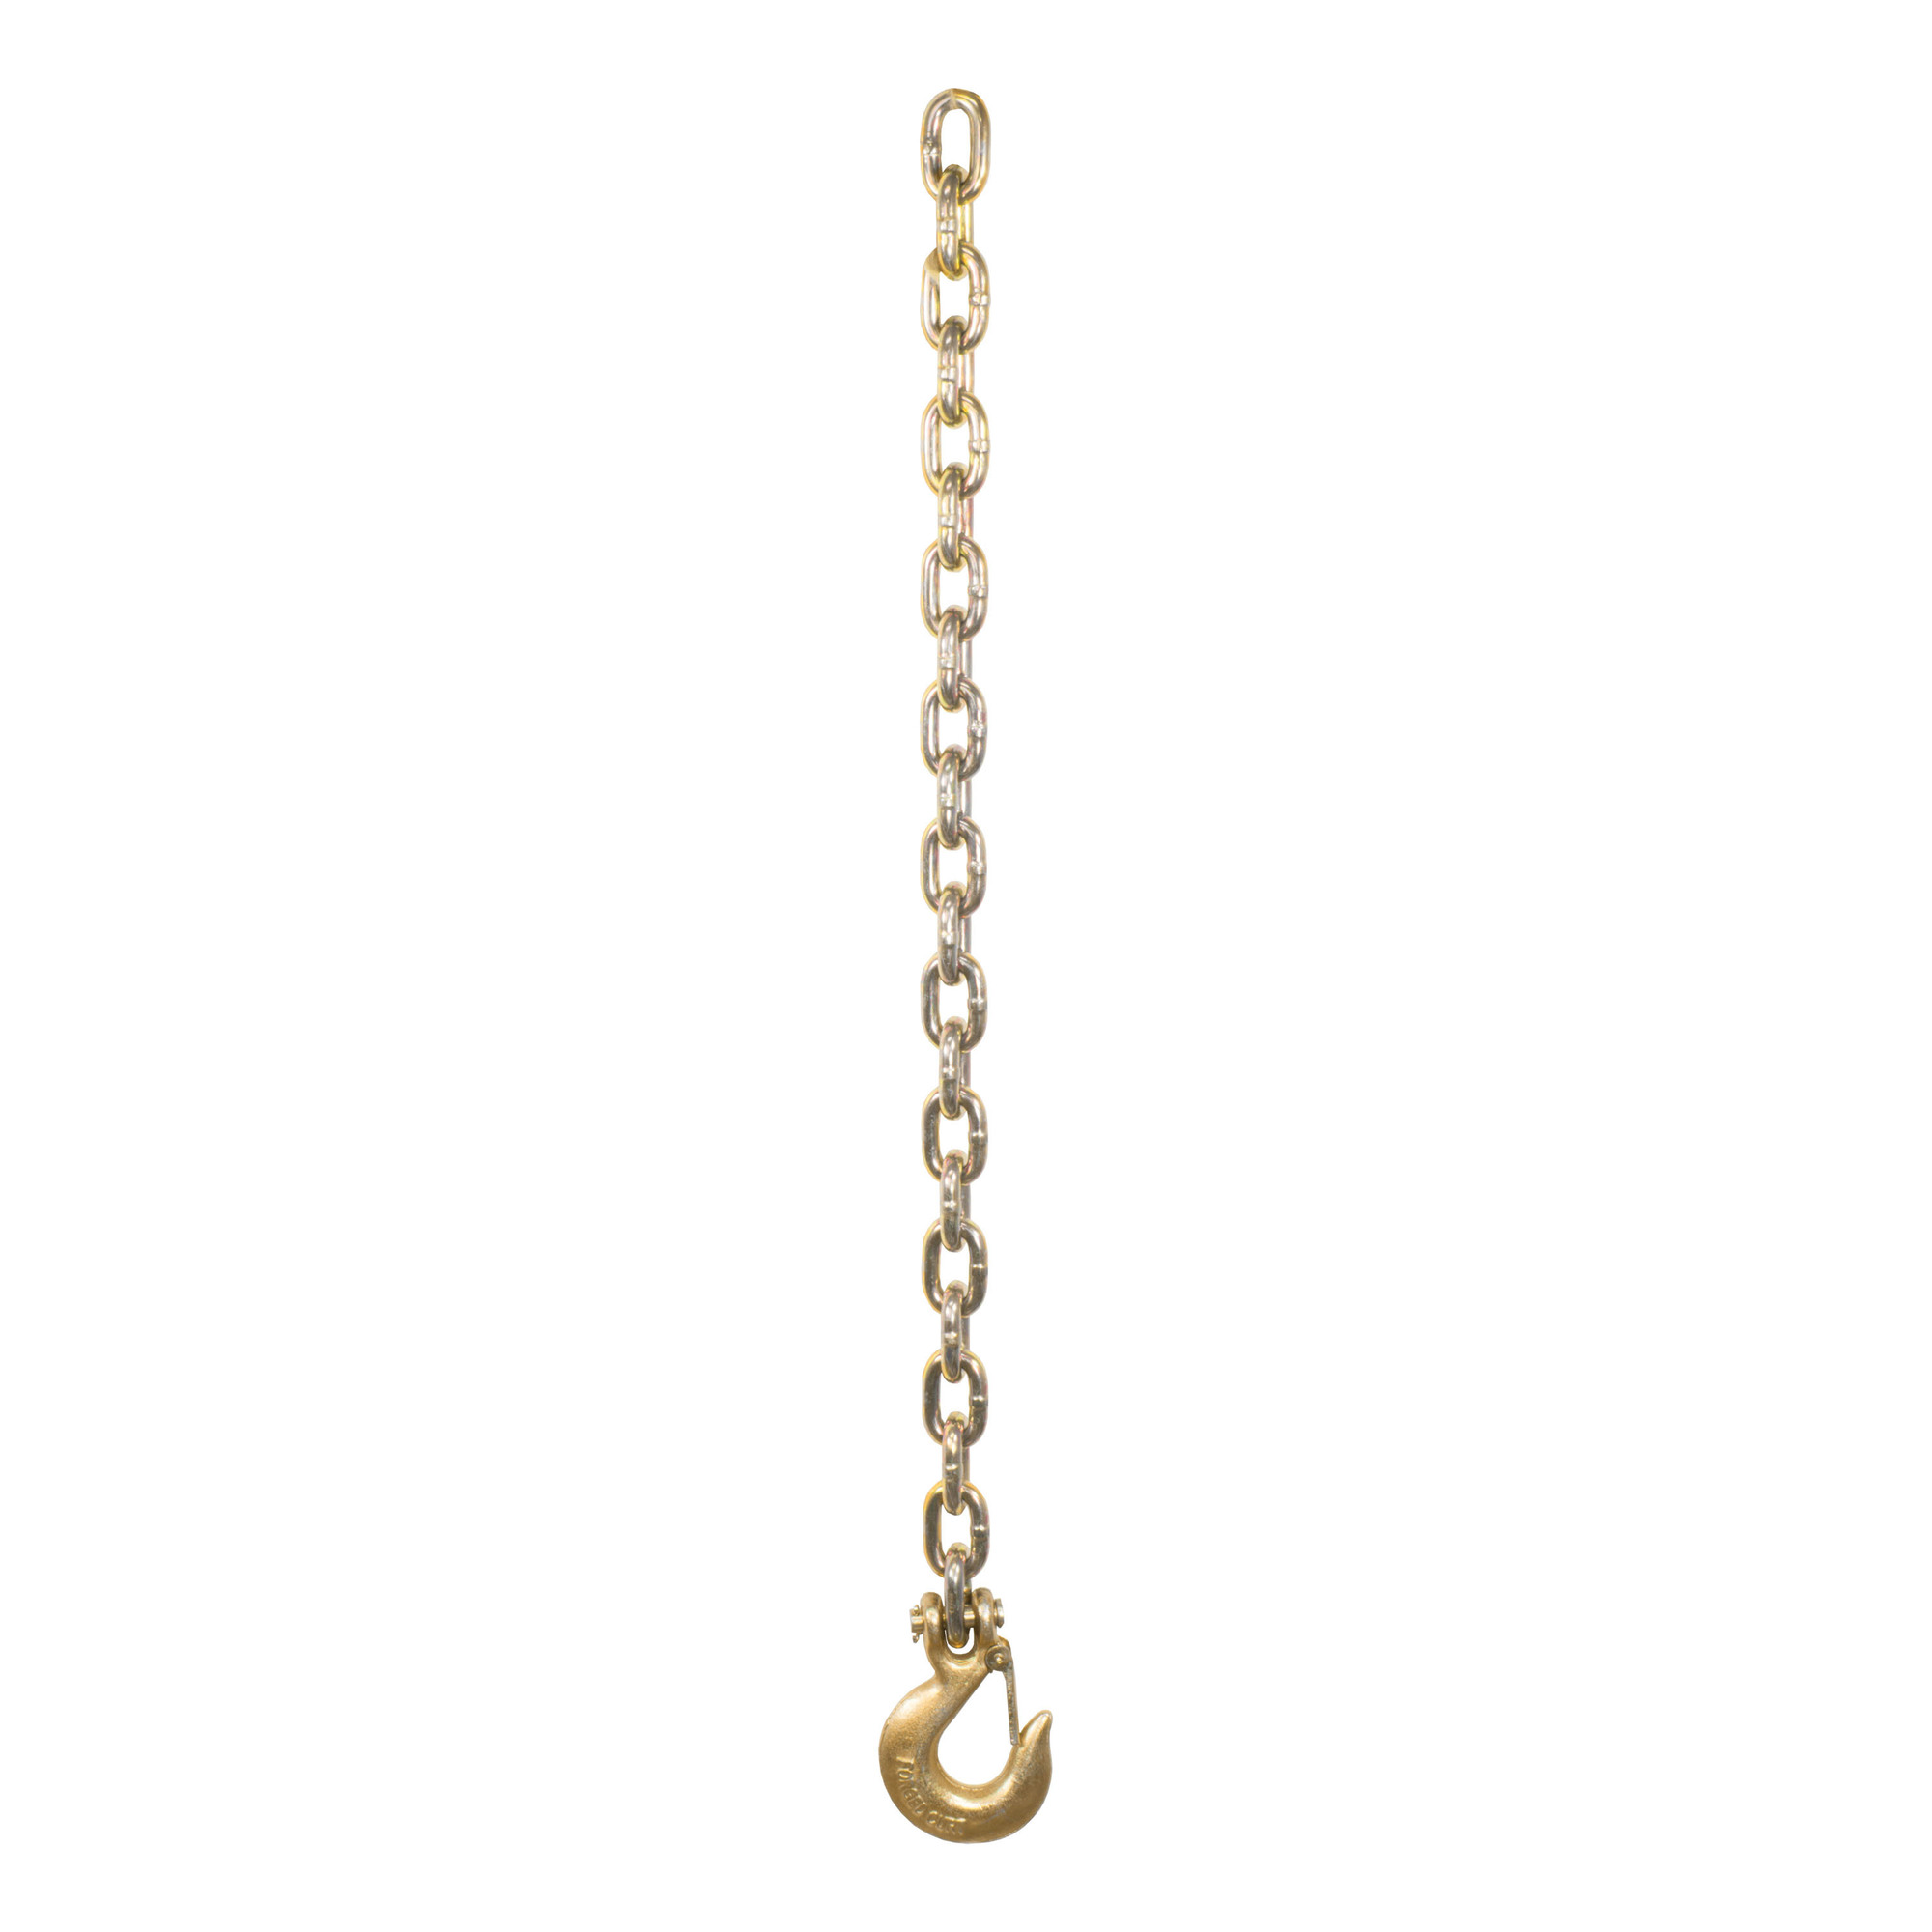 Curt Manufacturing, 35Inch Safety Chain with 1 Clevis Hook, Length 35 in, Material Steel, Model 80316